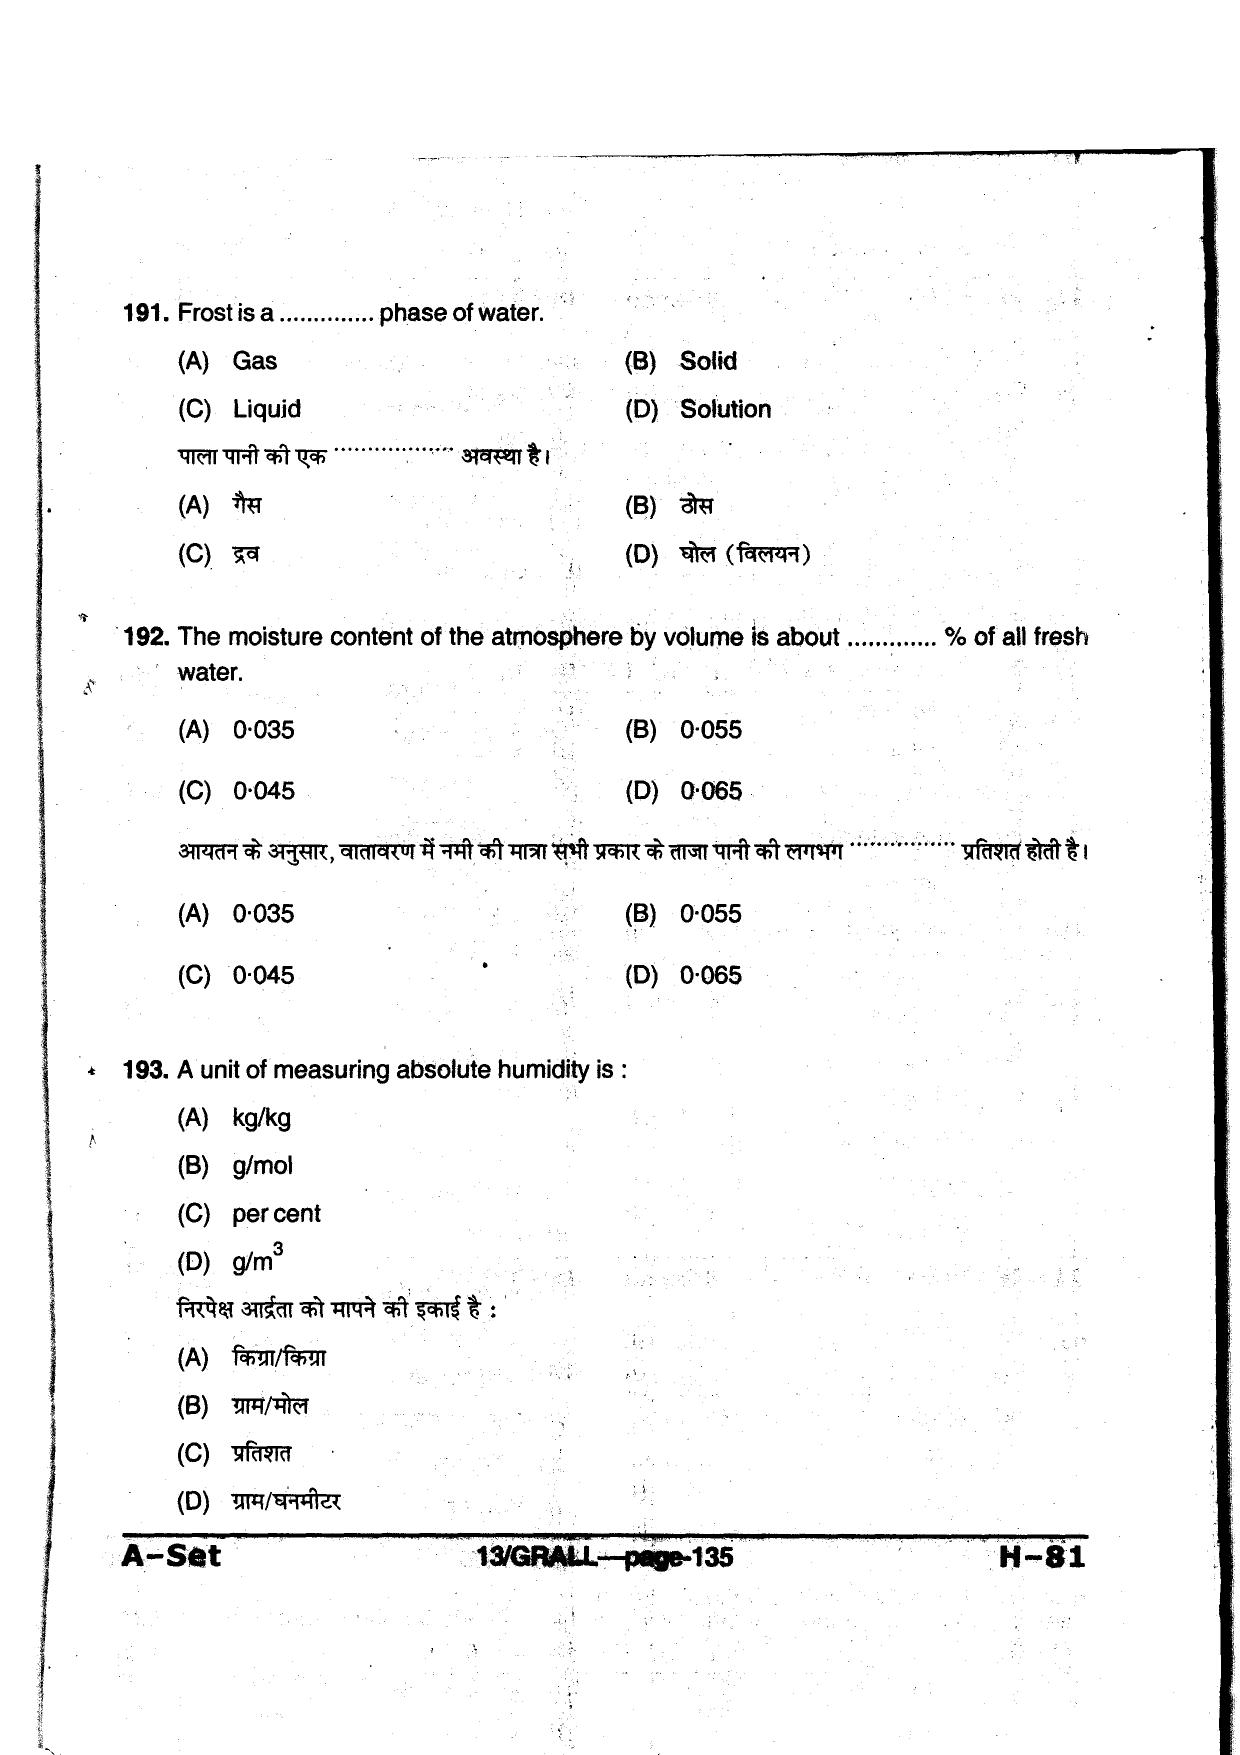 MP PAT 2013 Question Paper - Paper I - Page 135